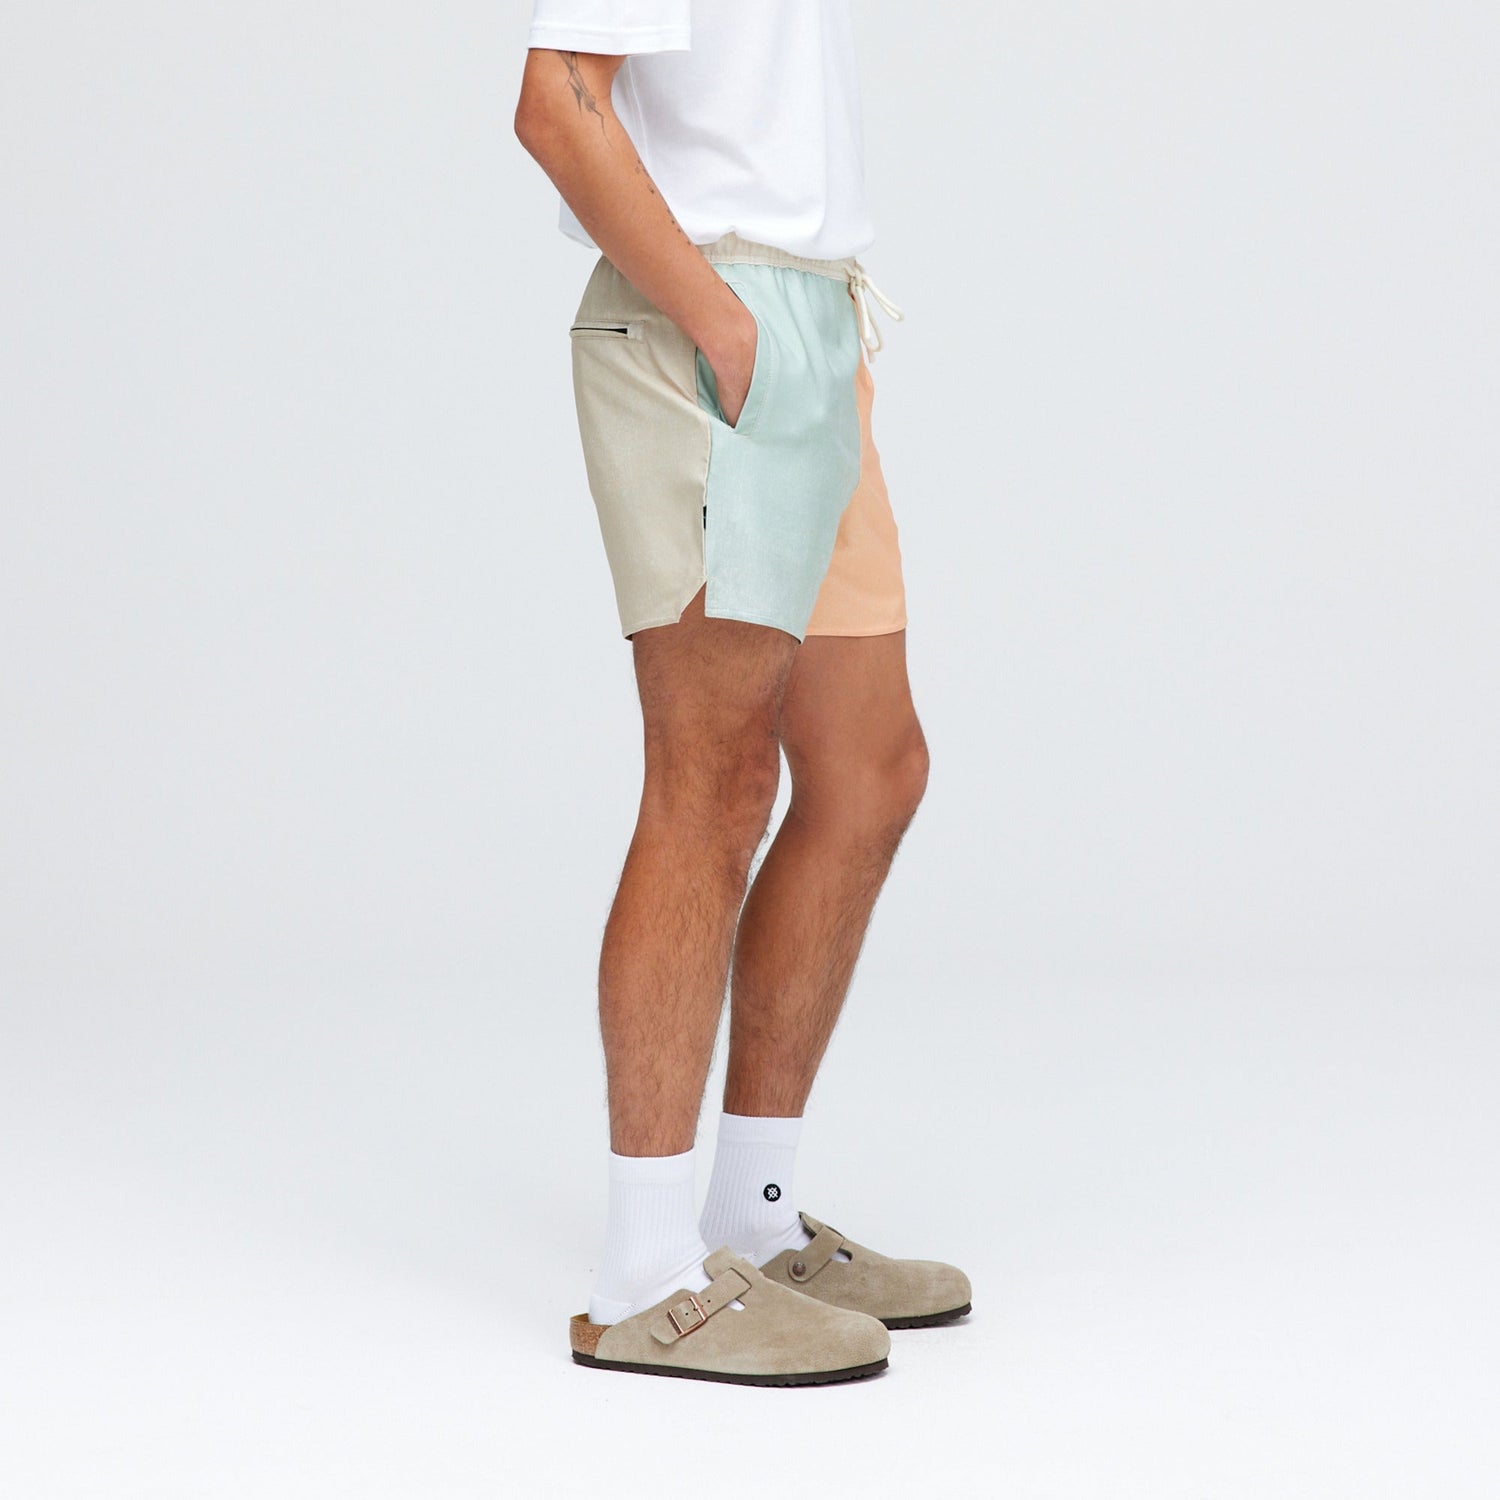 Stance Complex Athletic Short 5" Peach |model